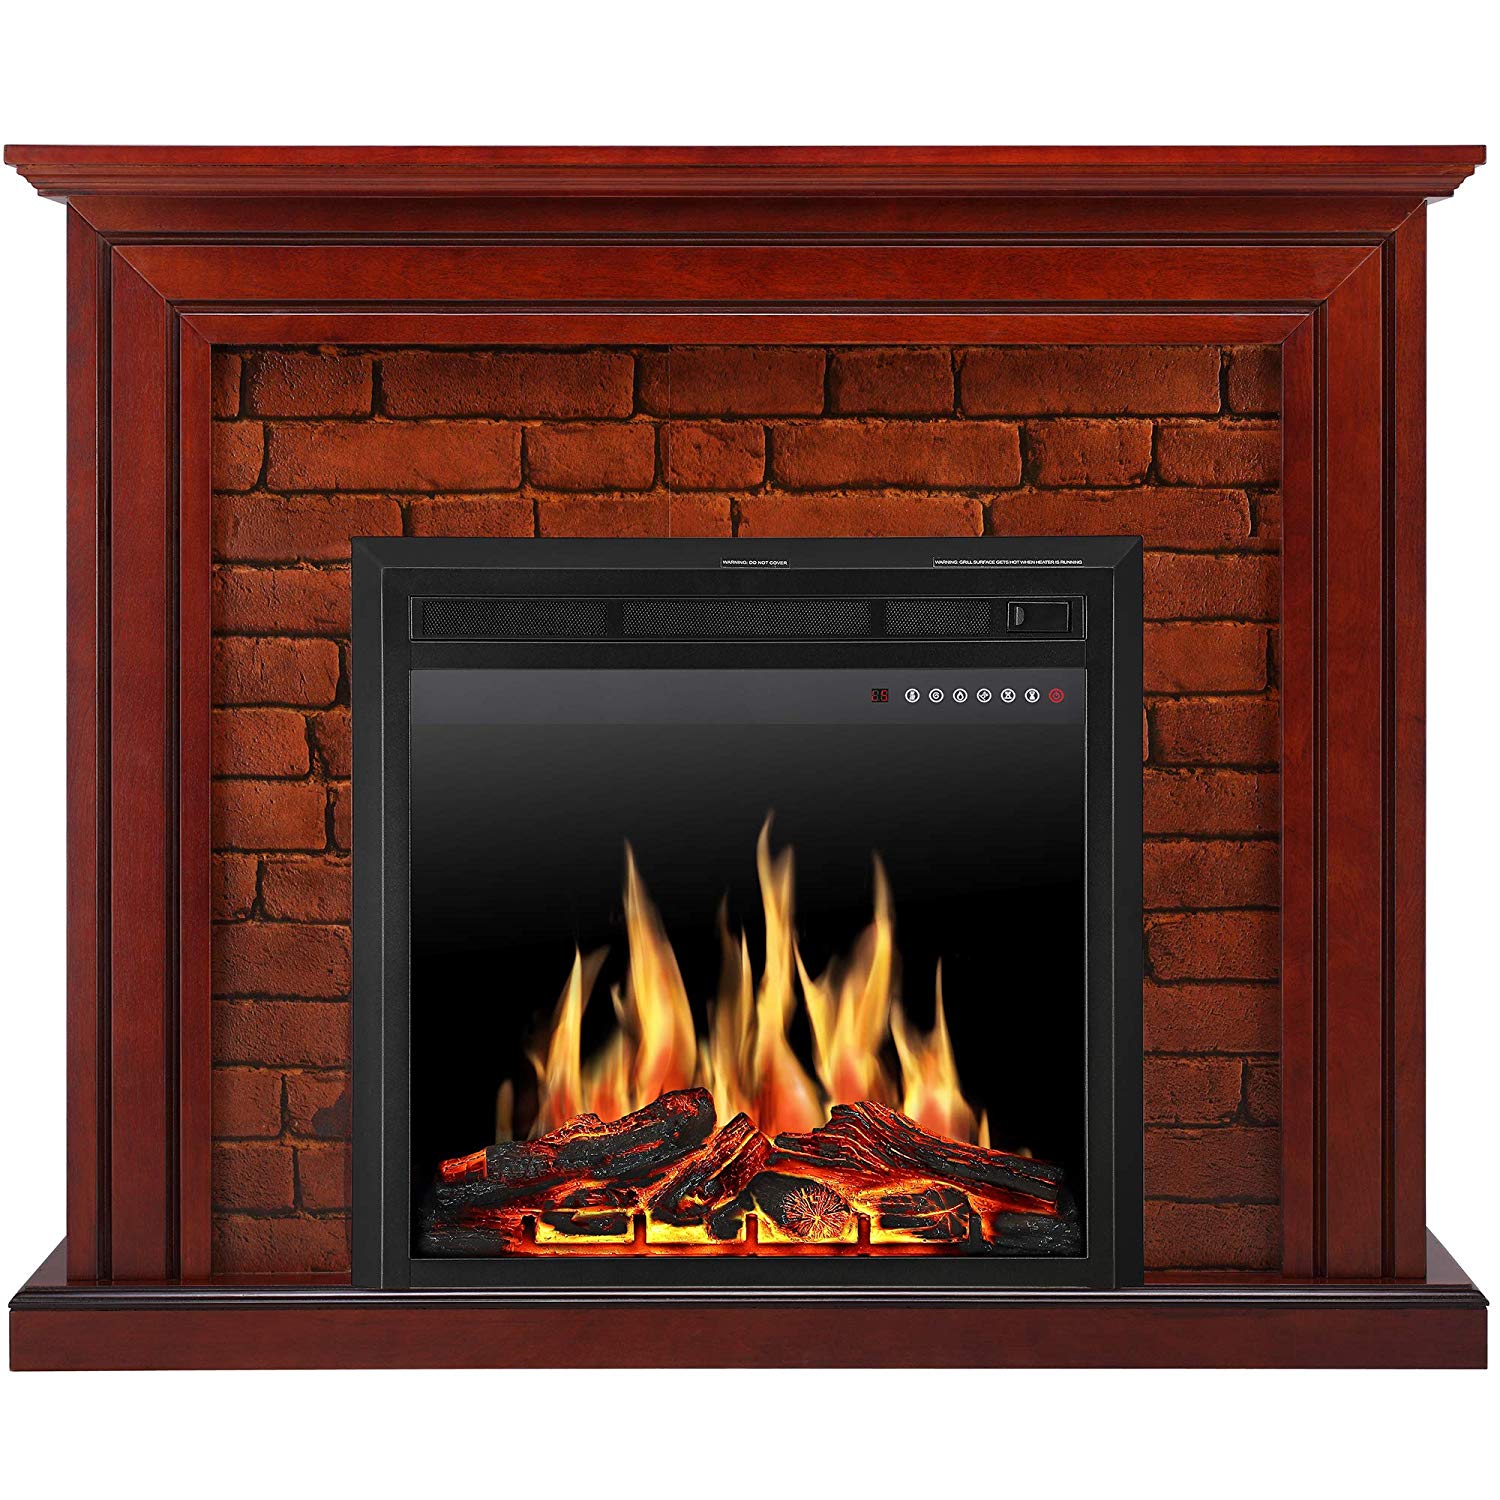 Dark Wood Electric Fireplace Best Of Jamfly Electric Fireplace Mantel Package Traditional Brick Wall Design Heater with Remote Control and Led touch Screen Home Accent Furnishings